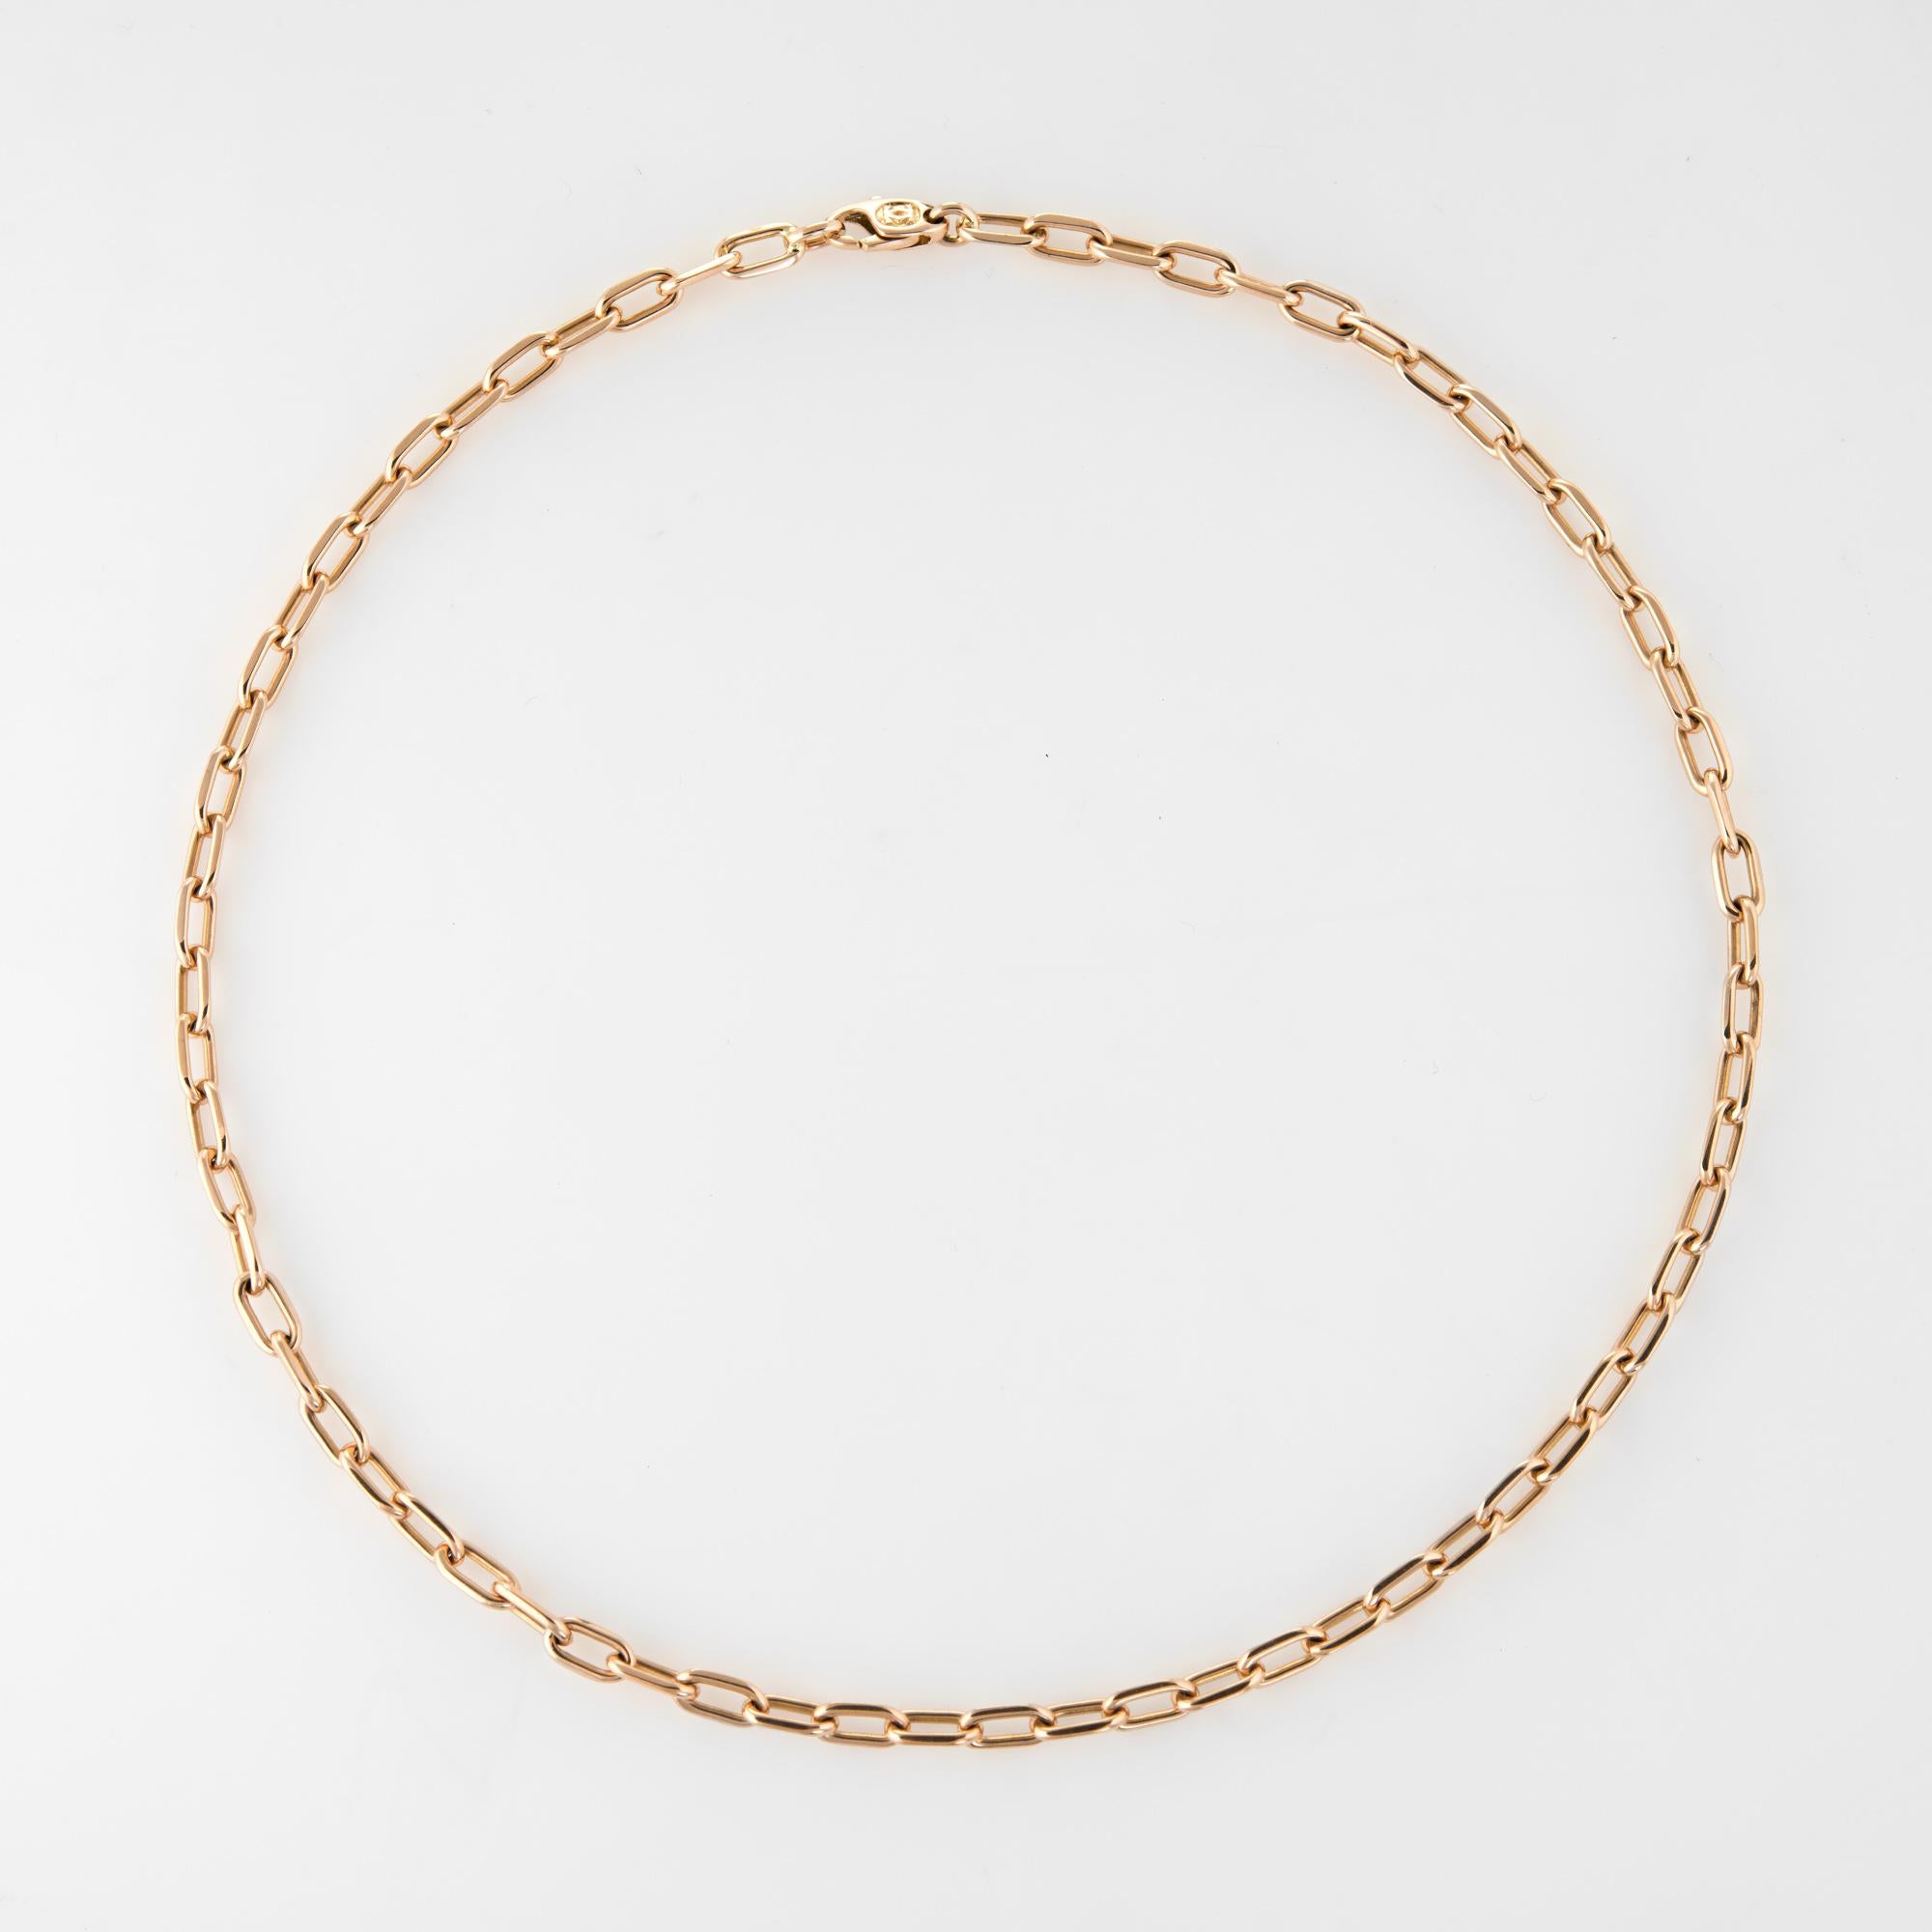 Cartier Spartacus link necklace, crafted in 18 karat rose gold. 

Smooth polished links terminate to a lobster clasp. The necklace measures 18 1/2 inches in length.

The necklace is in excellent original condition.

Particulars:

Weight: 29.7